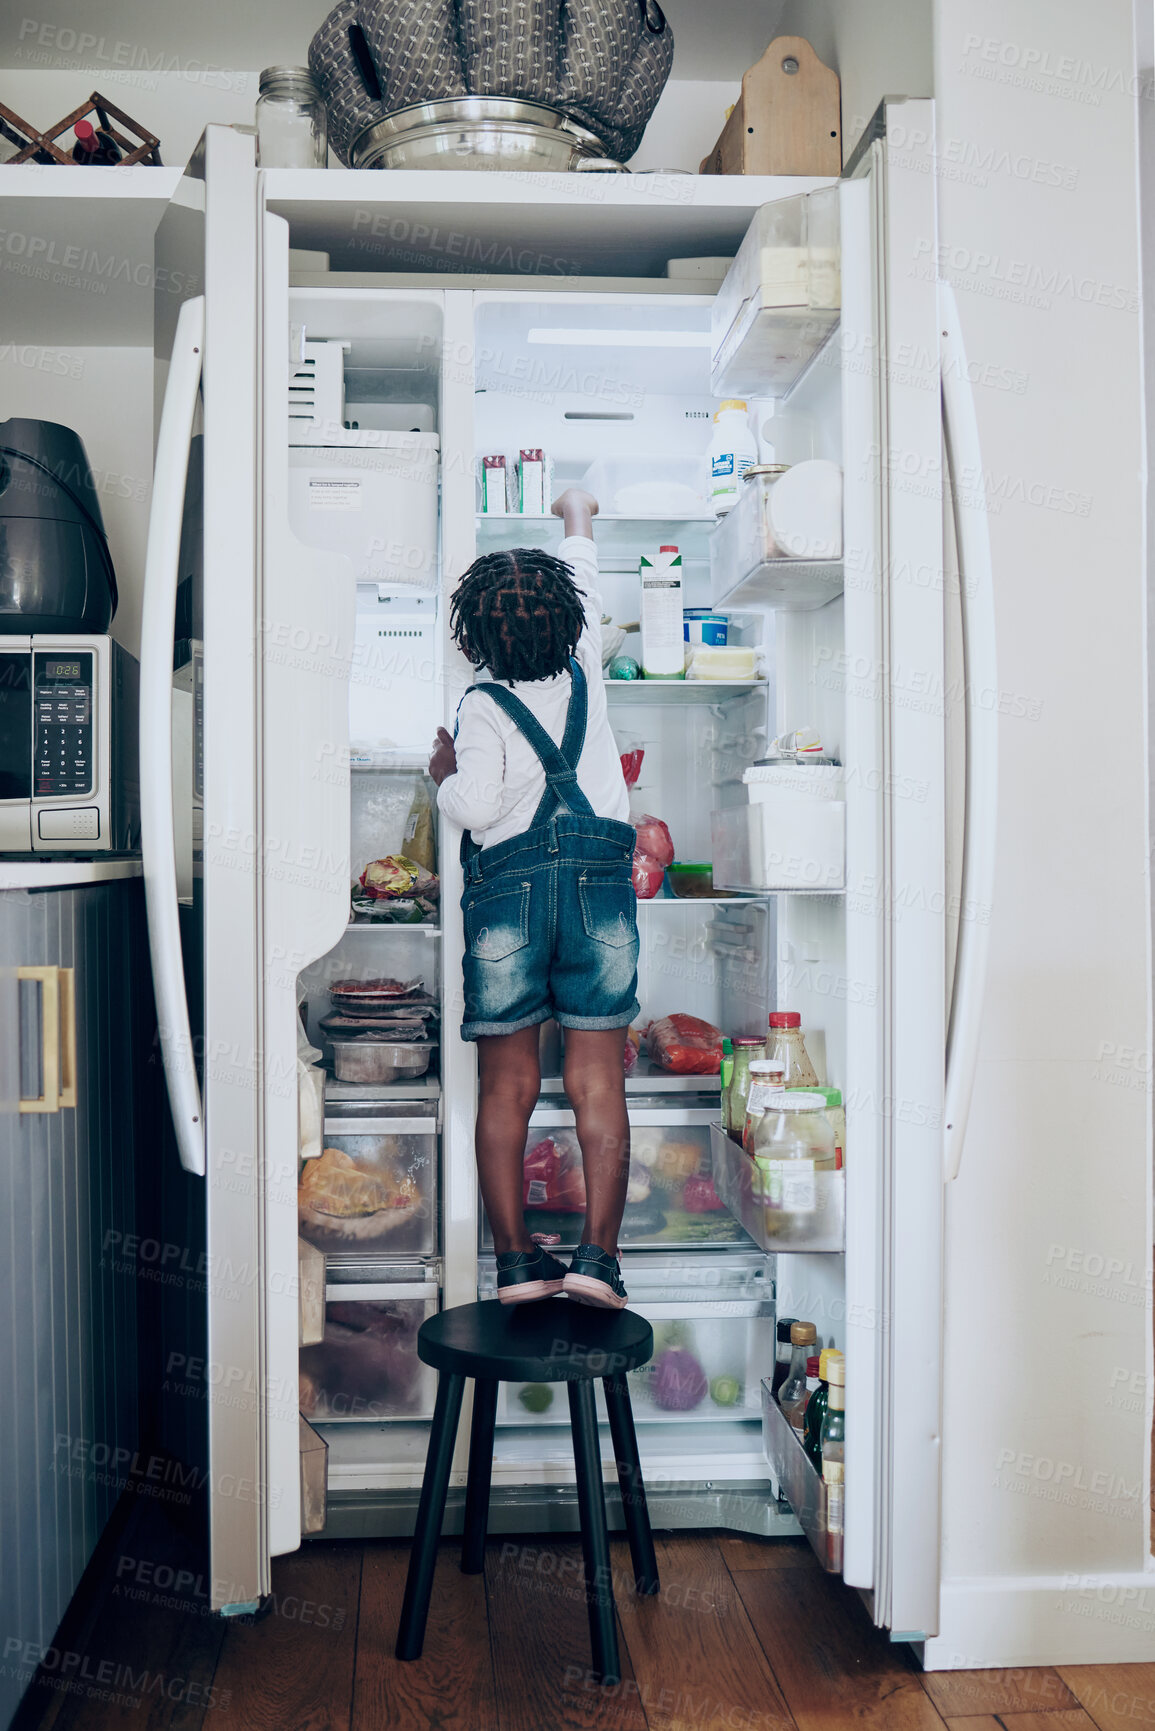 Buy stock photo Shot of a toddler taking food from the fridge at home